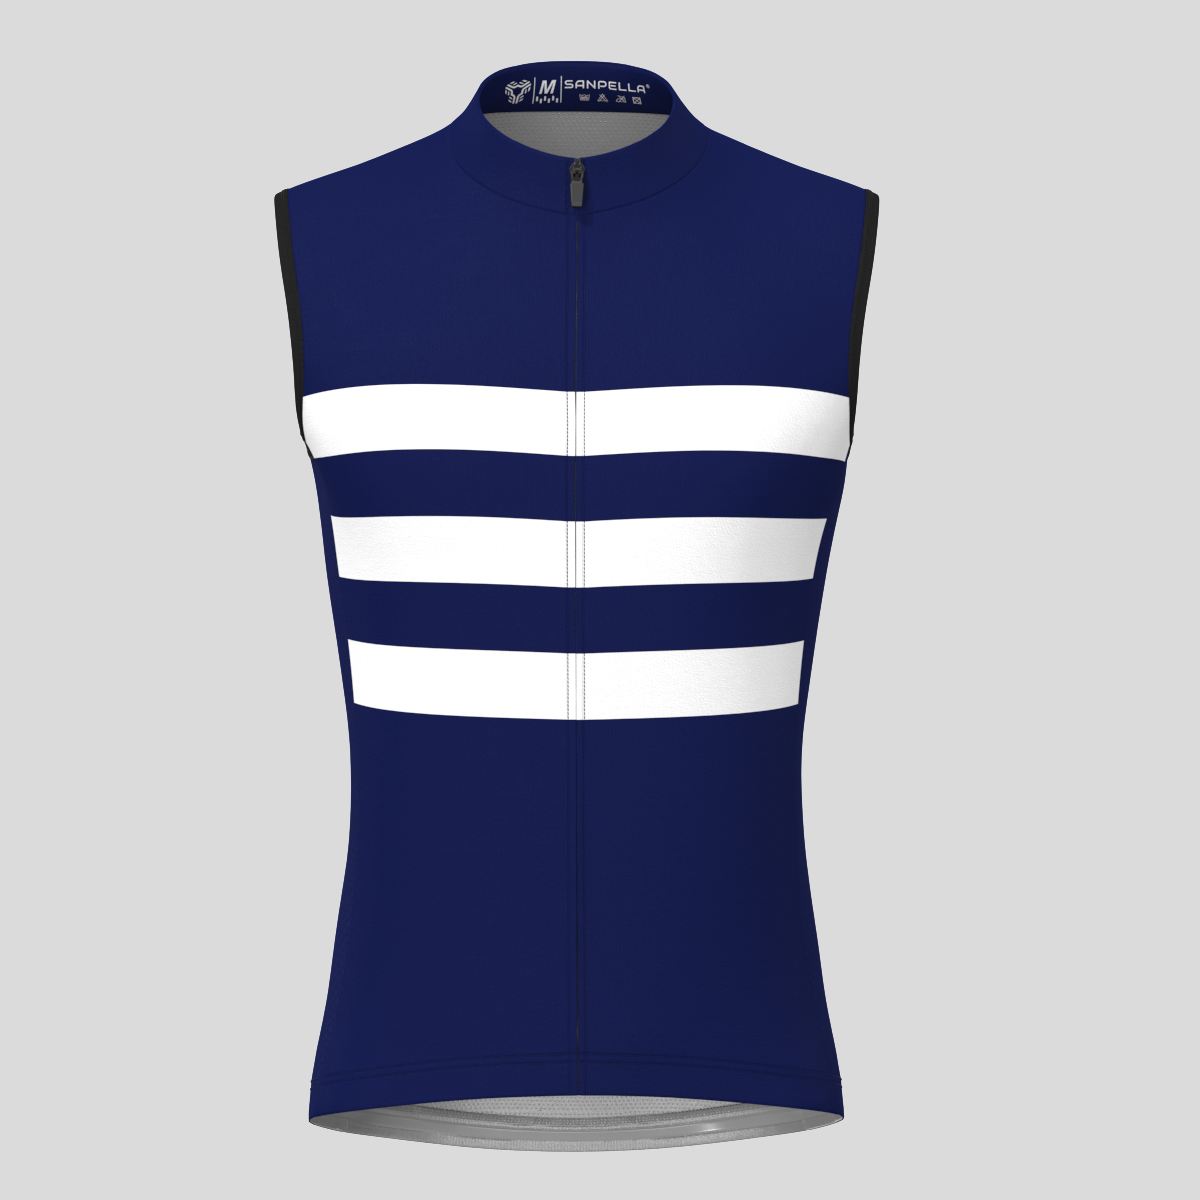 Men's Classic Stripes Sleeveless Cycling Jersey - Ink